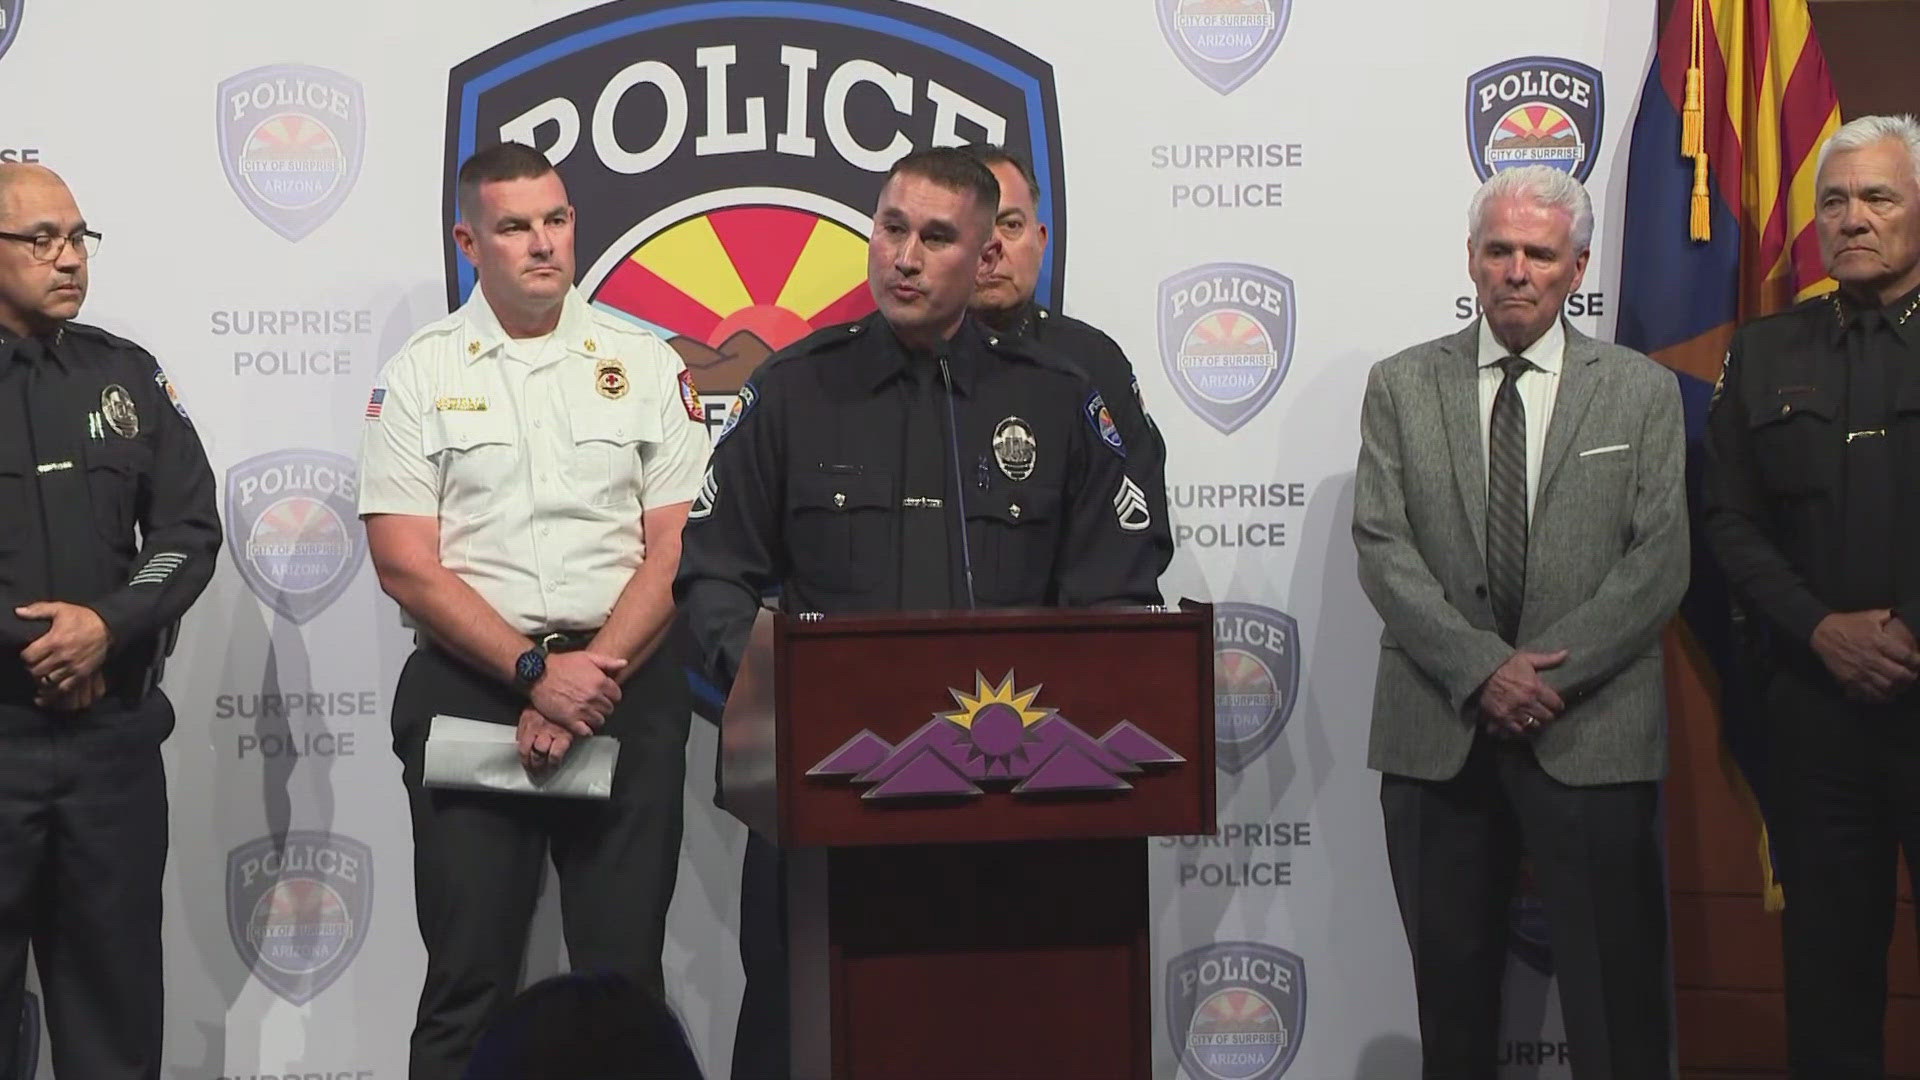 Surprise police provide an update on the baby that miraculously survived multiple gunshot wounds.